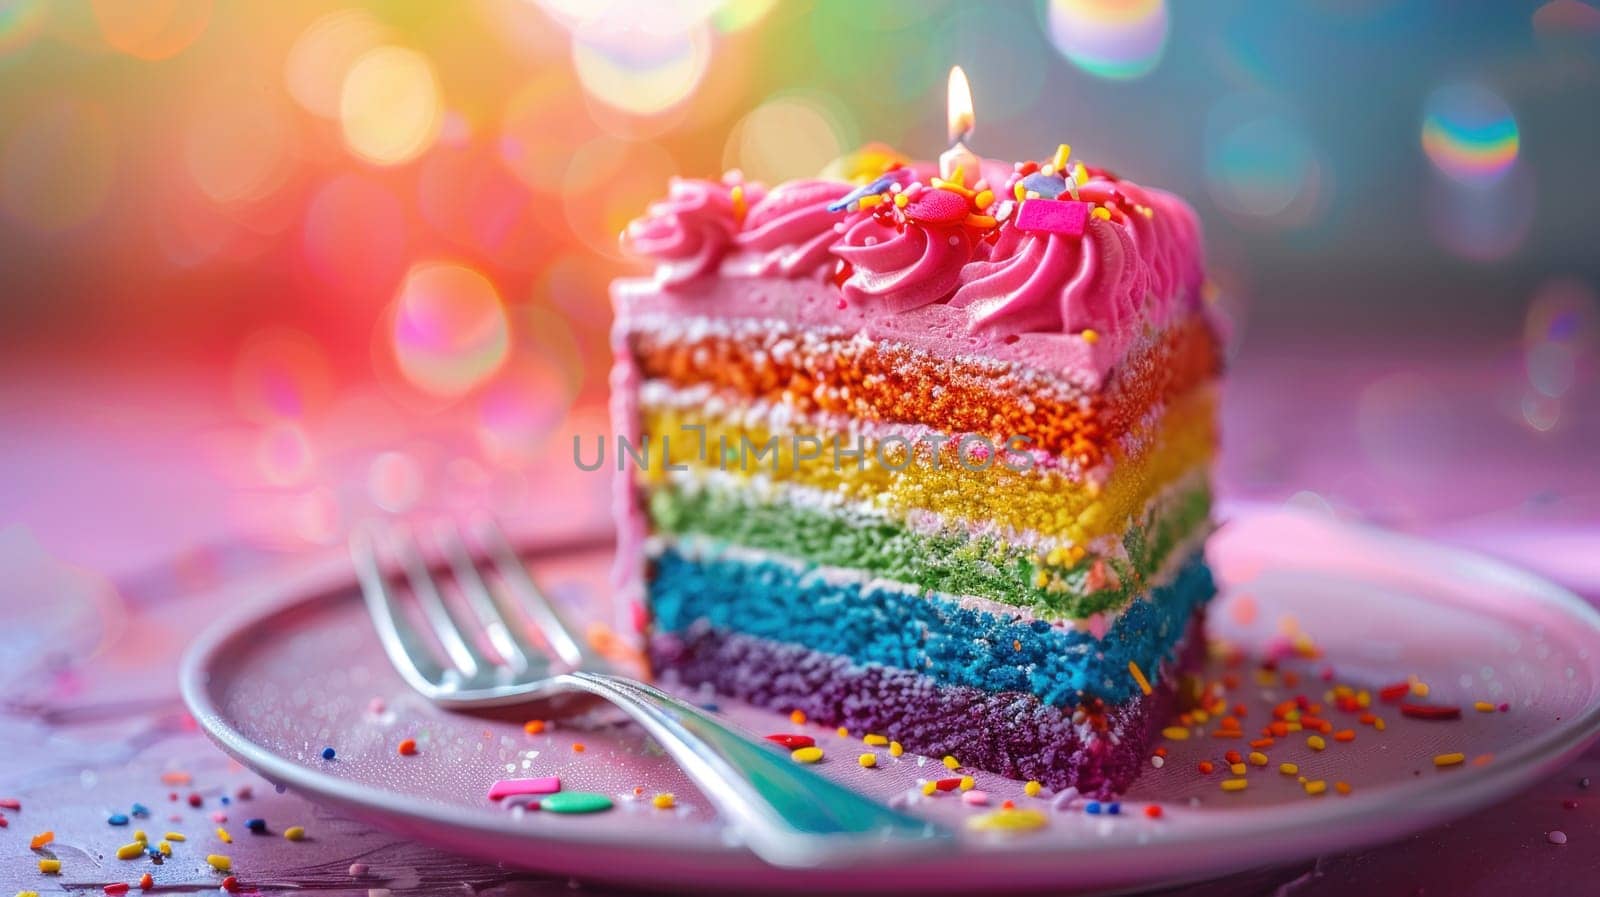 A slice of rainbow pride cake with pink frosting and sprinkles on a plate by golfmerrymaker